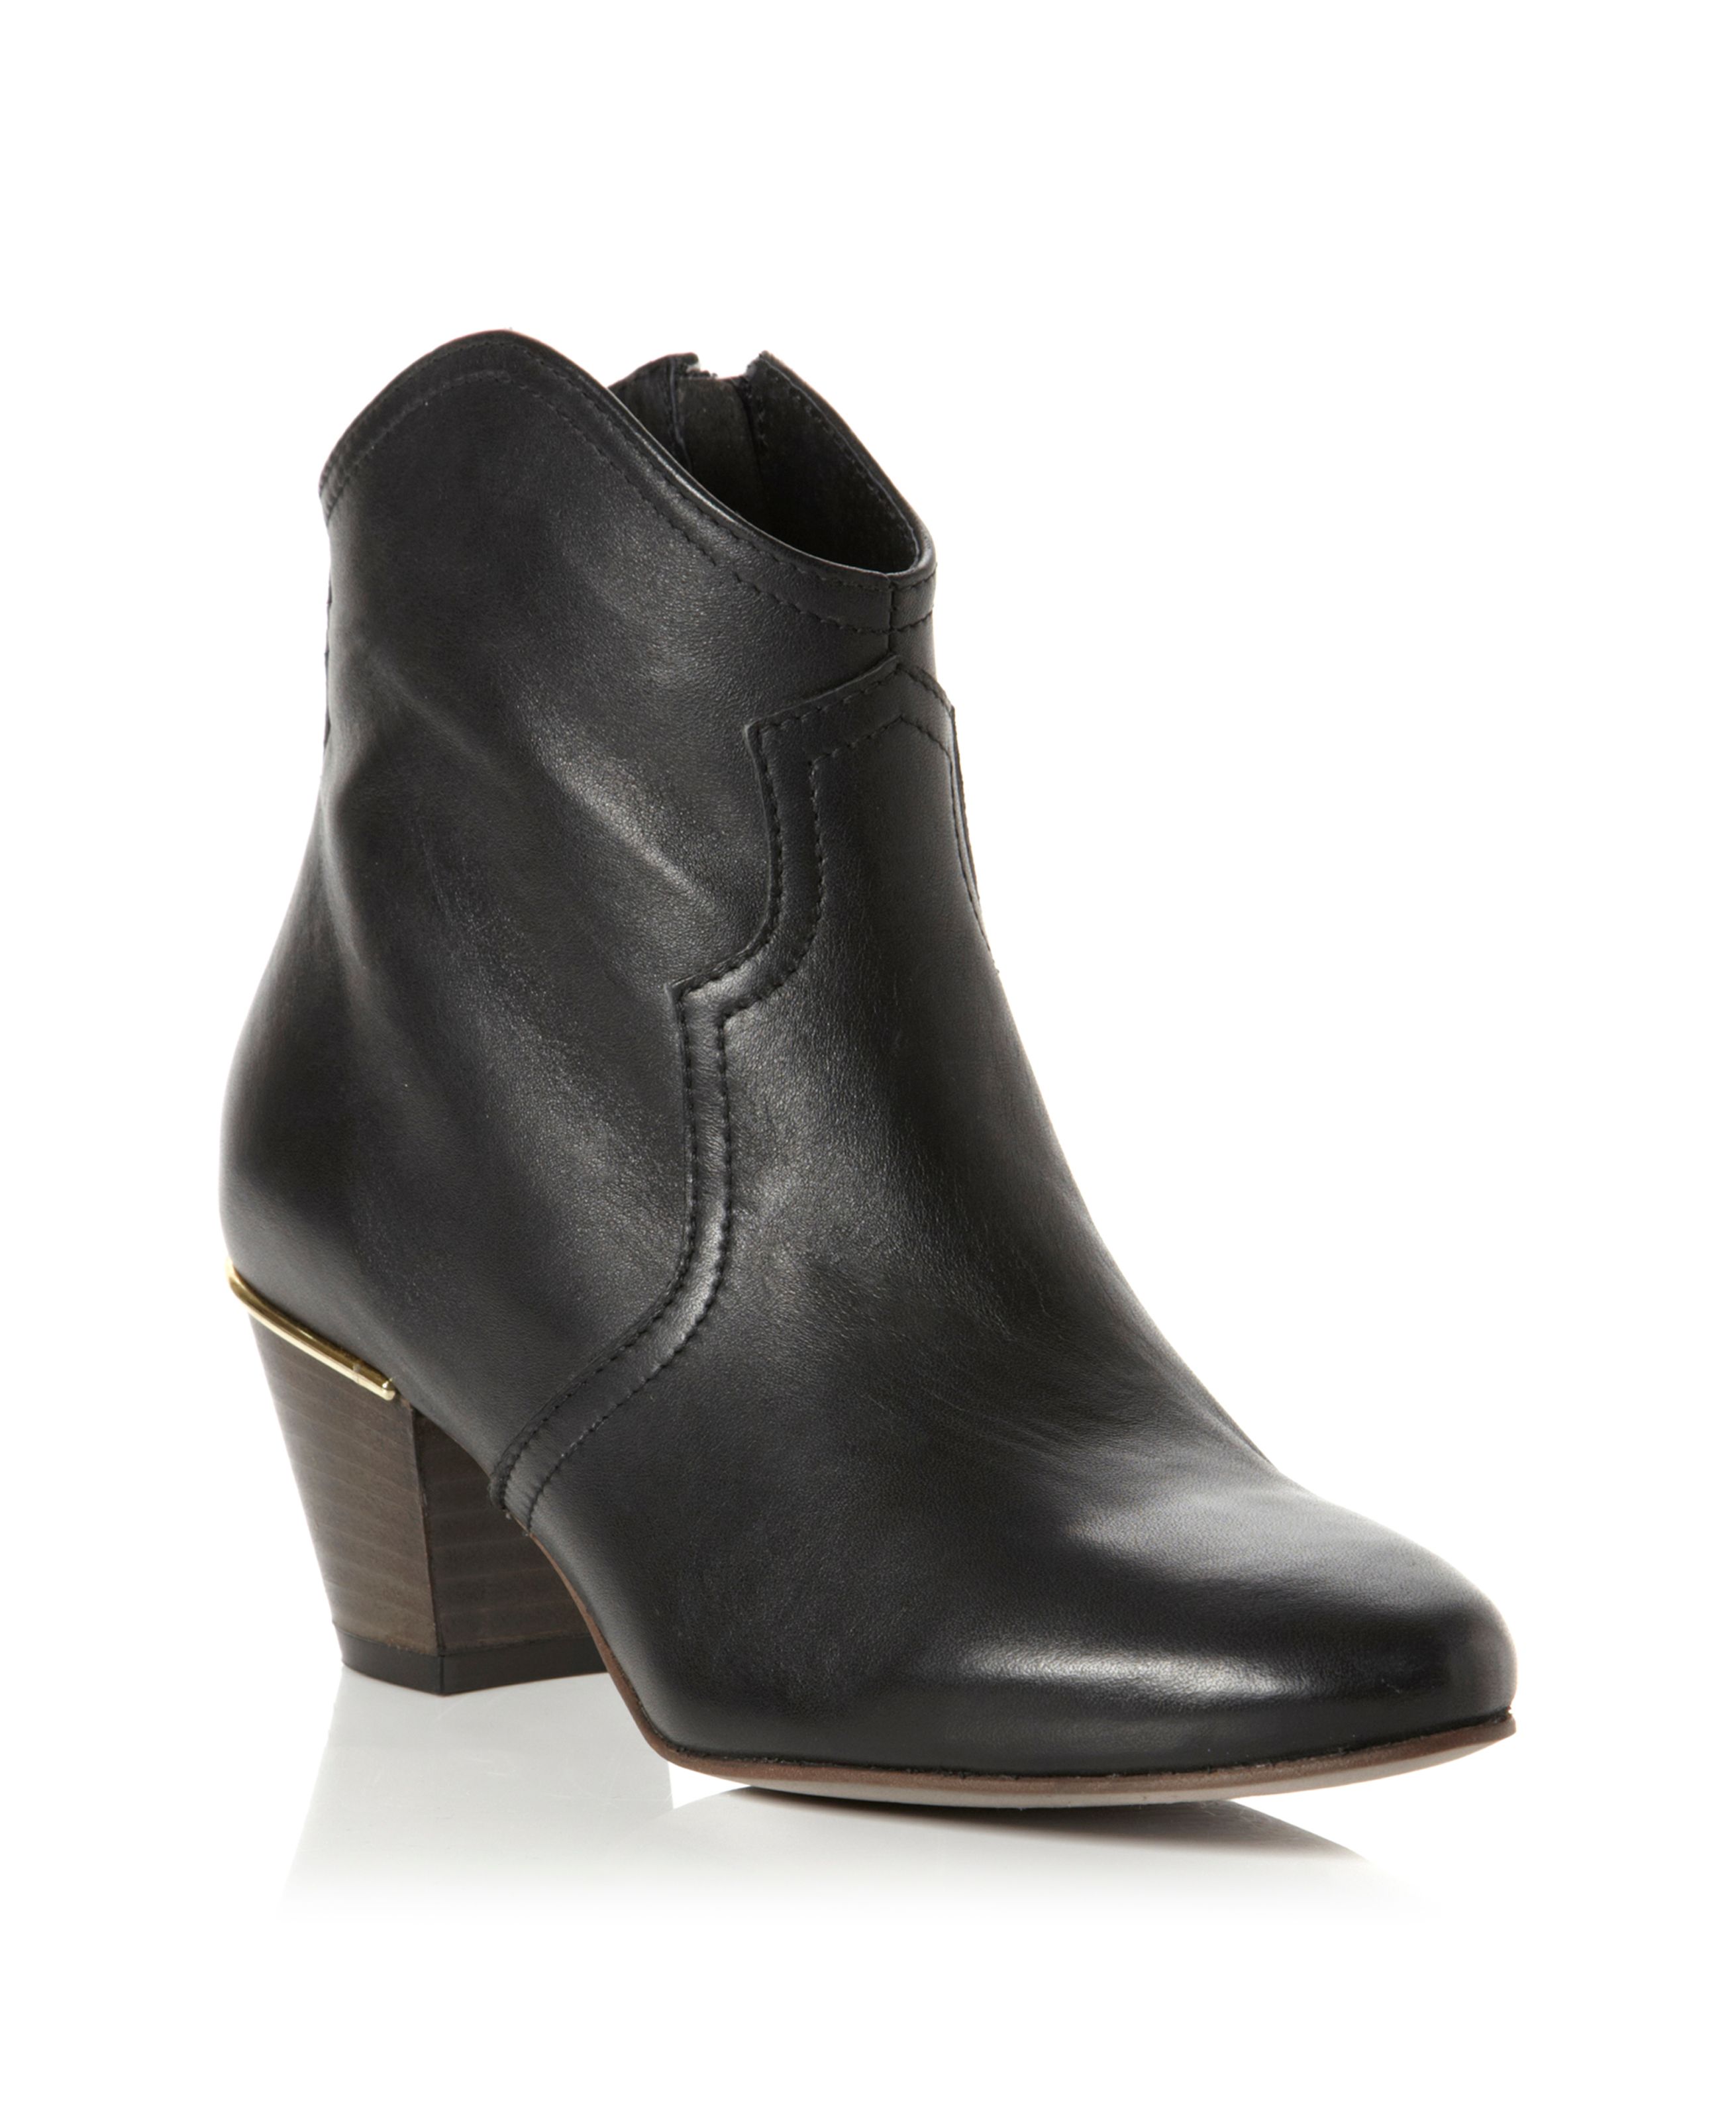 Dune Perla Leather Western Style Ankle Boots in Black | Lyst